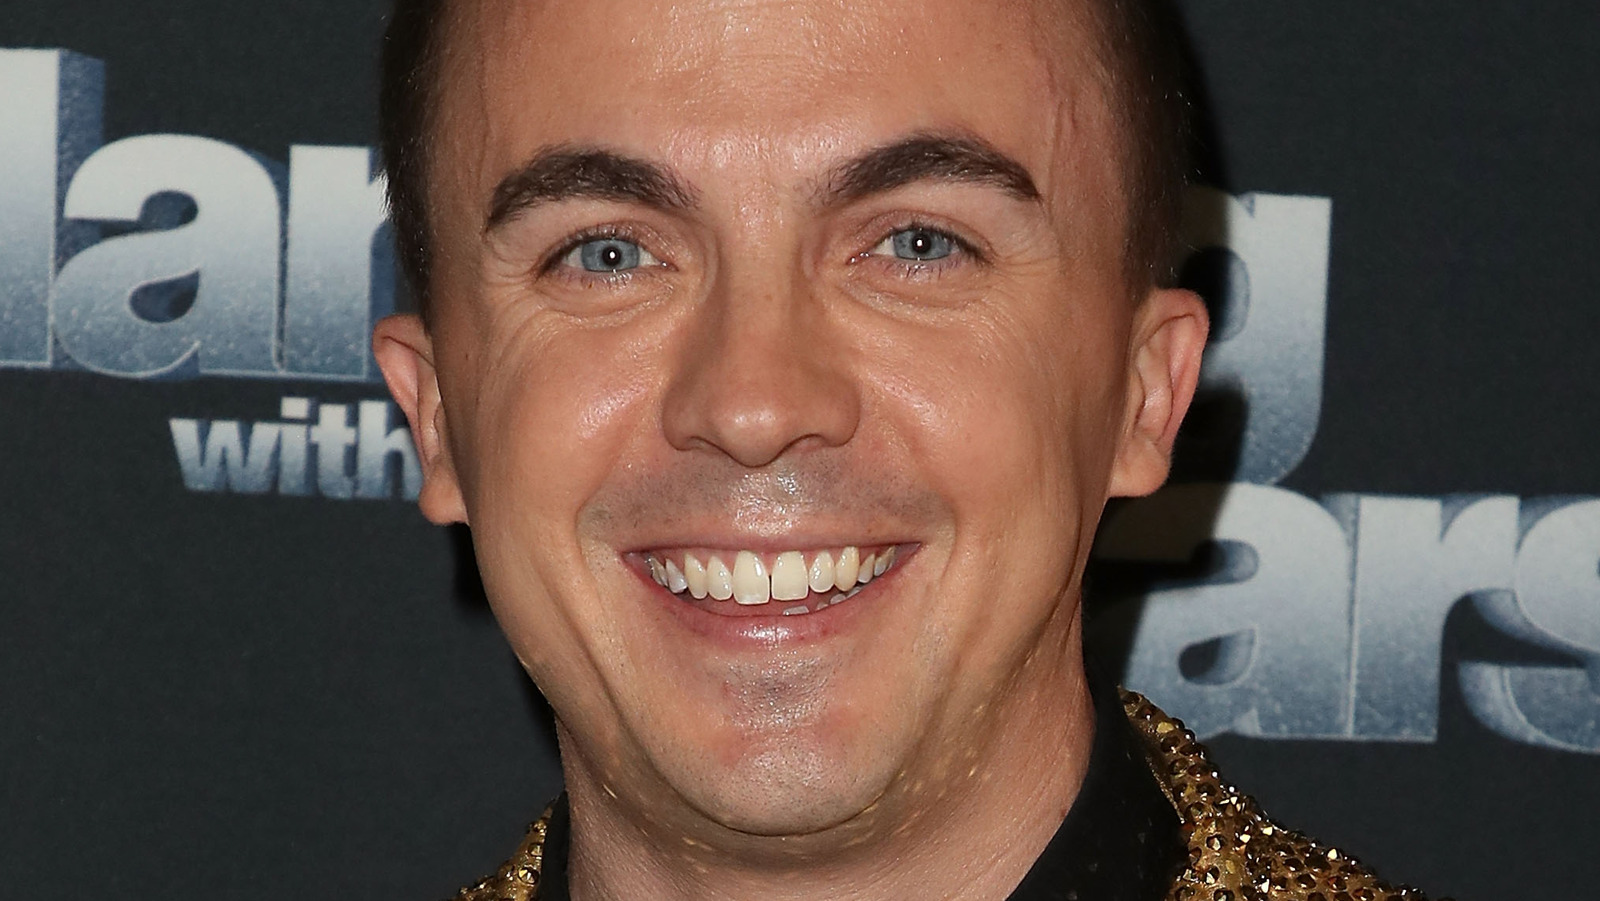 Frankie Muniz Calls Out DWTS For Misrepresenting Health Issues